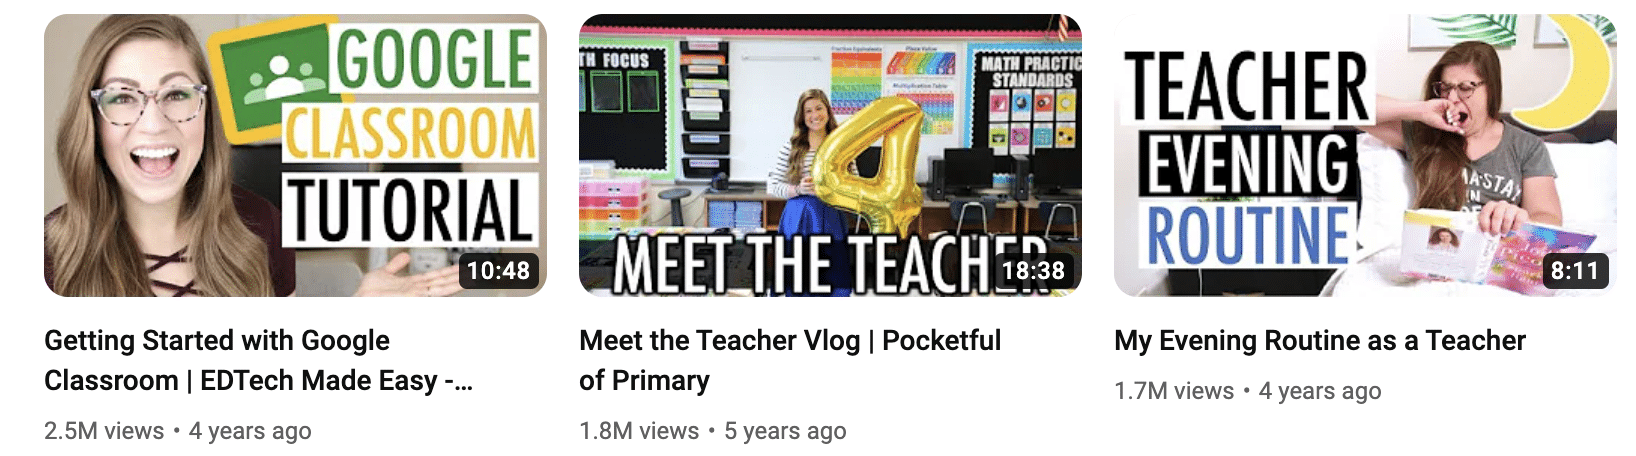 Best videos of one of the top teacher youtube channels, Pocketful of Primary.